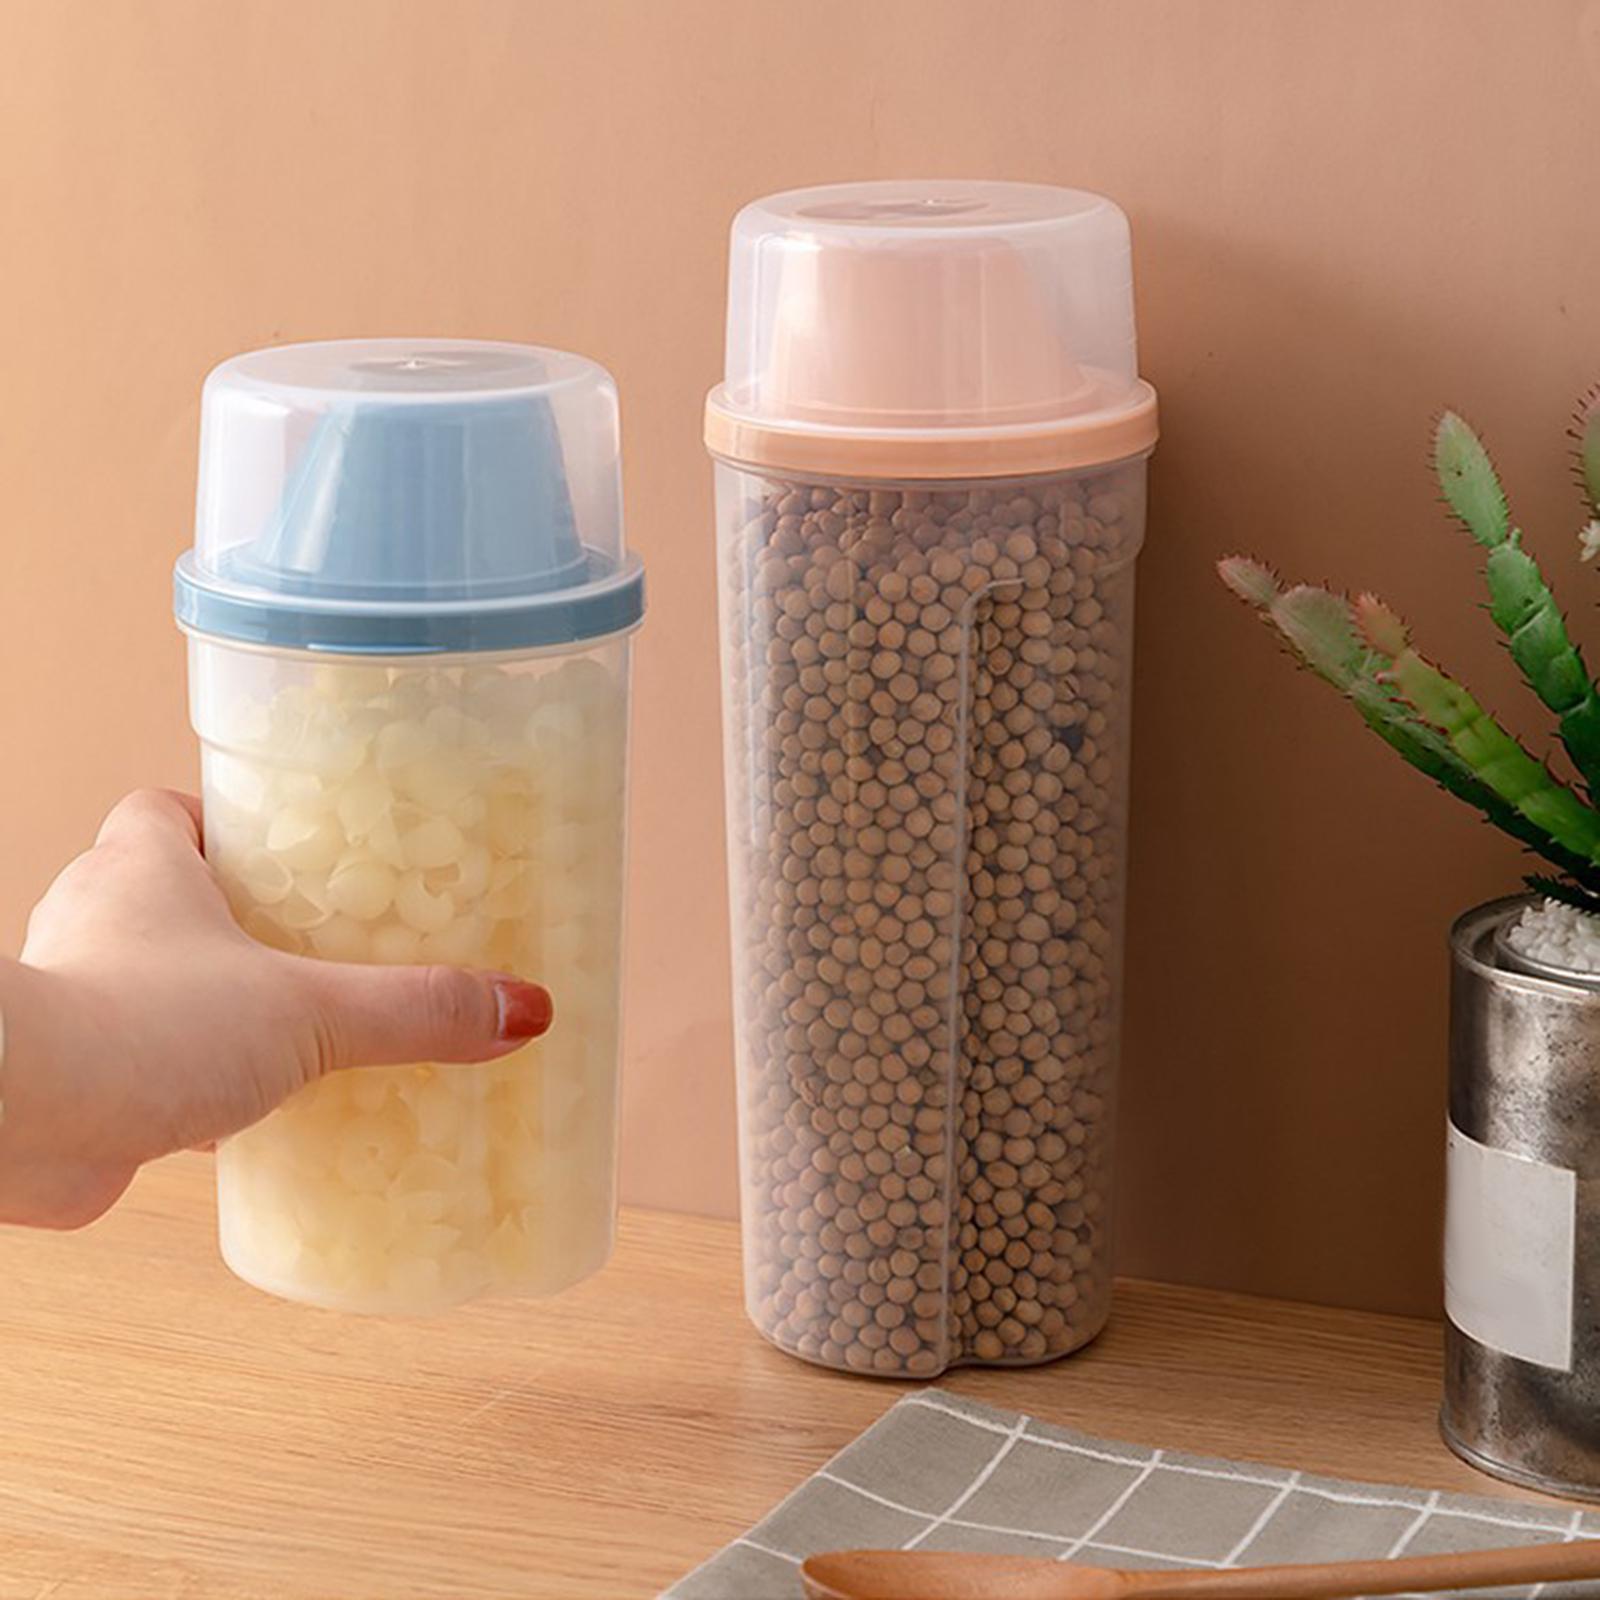 2x Sealed Cereal Container Food Dispenser Rice Storage Bin for Sugar Cereal